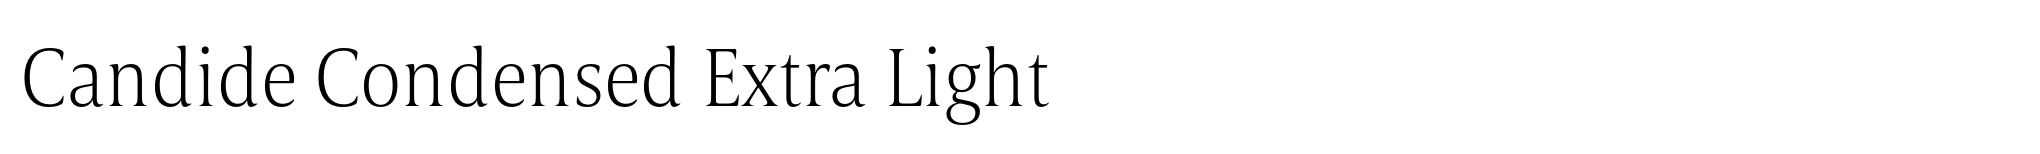 Candide Condensed Extra Light image